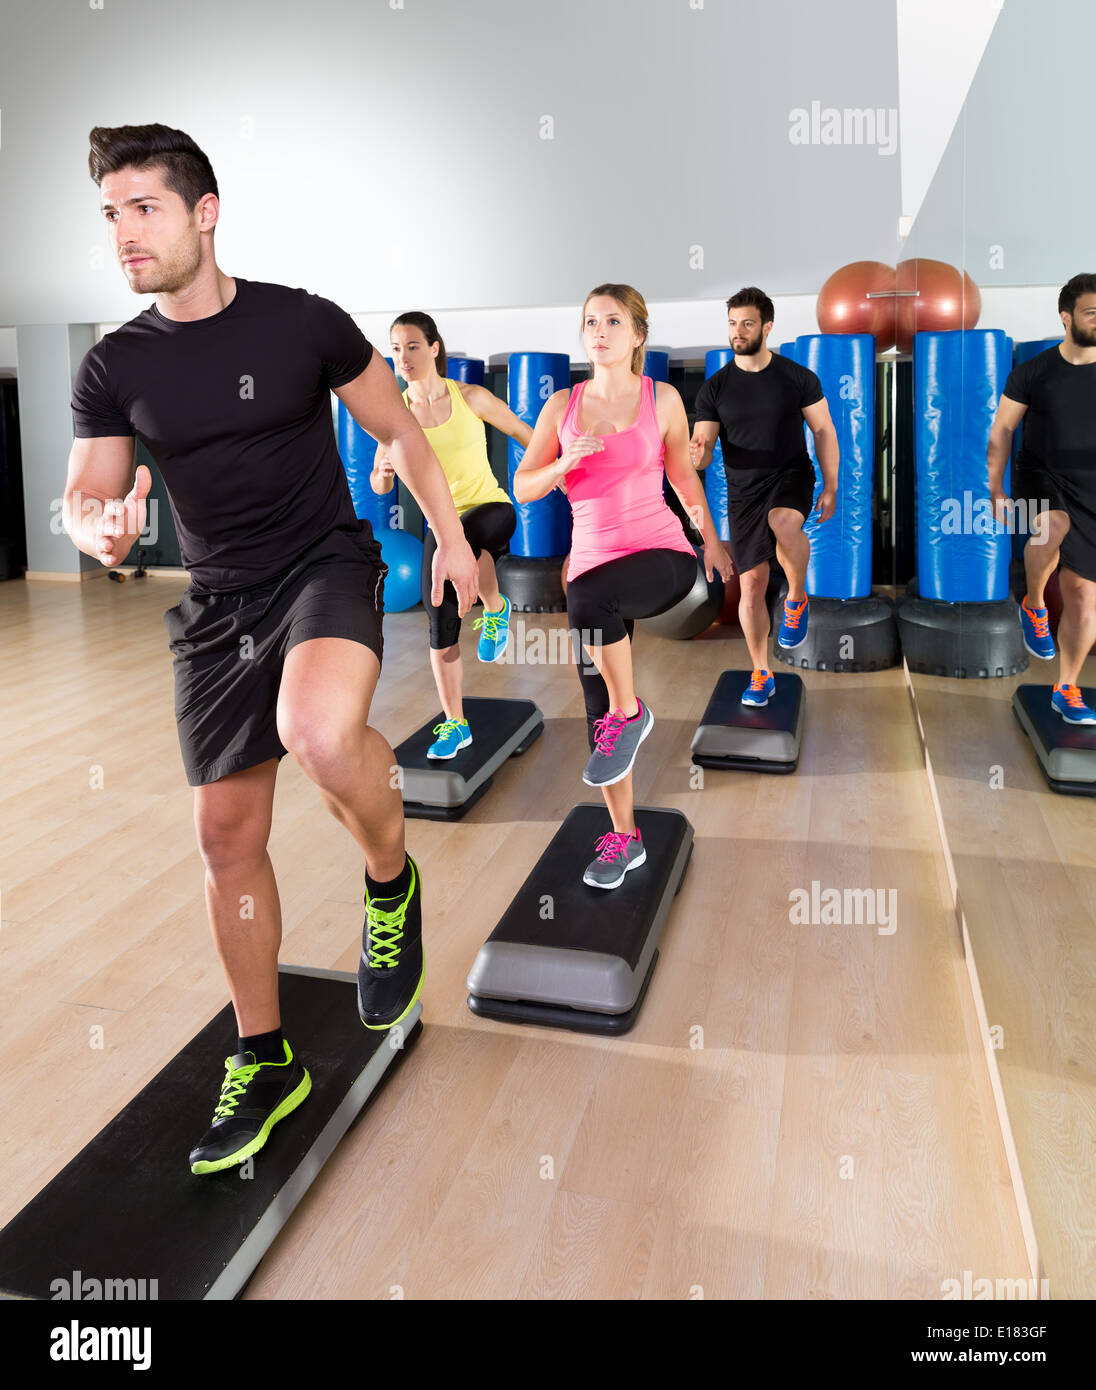 Cardio step dance people group at fitness gym training workout Stock Photo  - Alamy